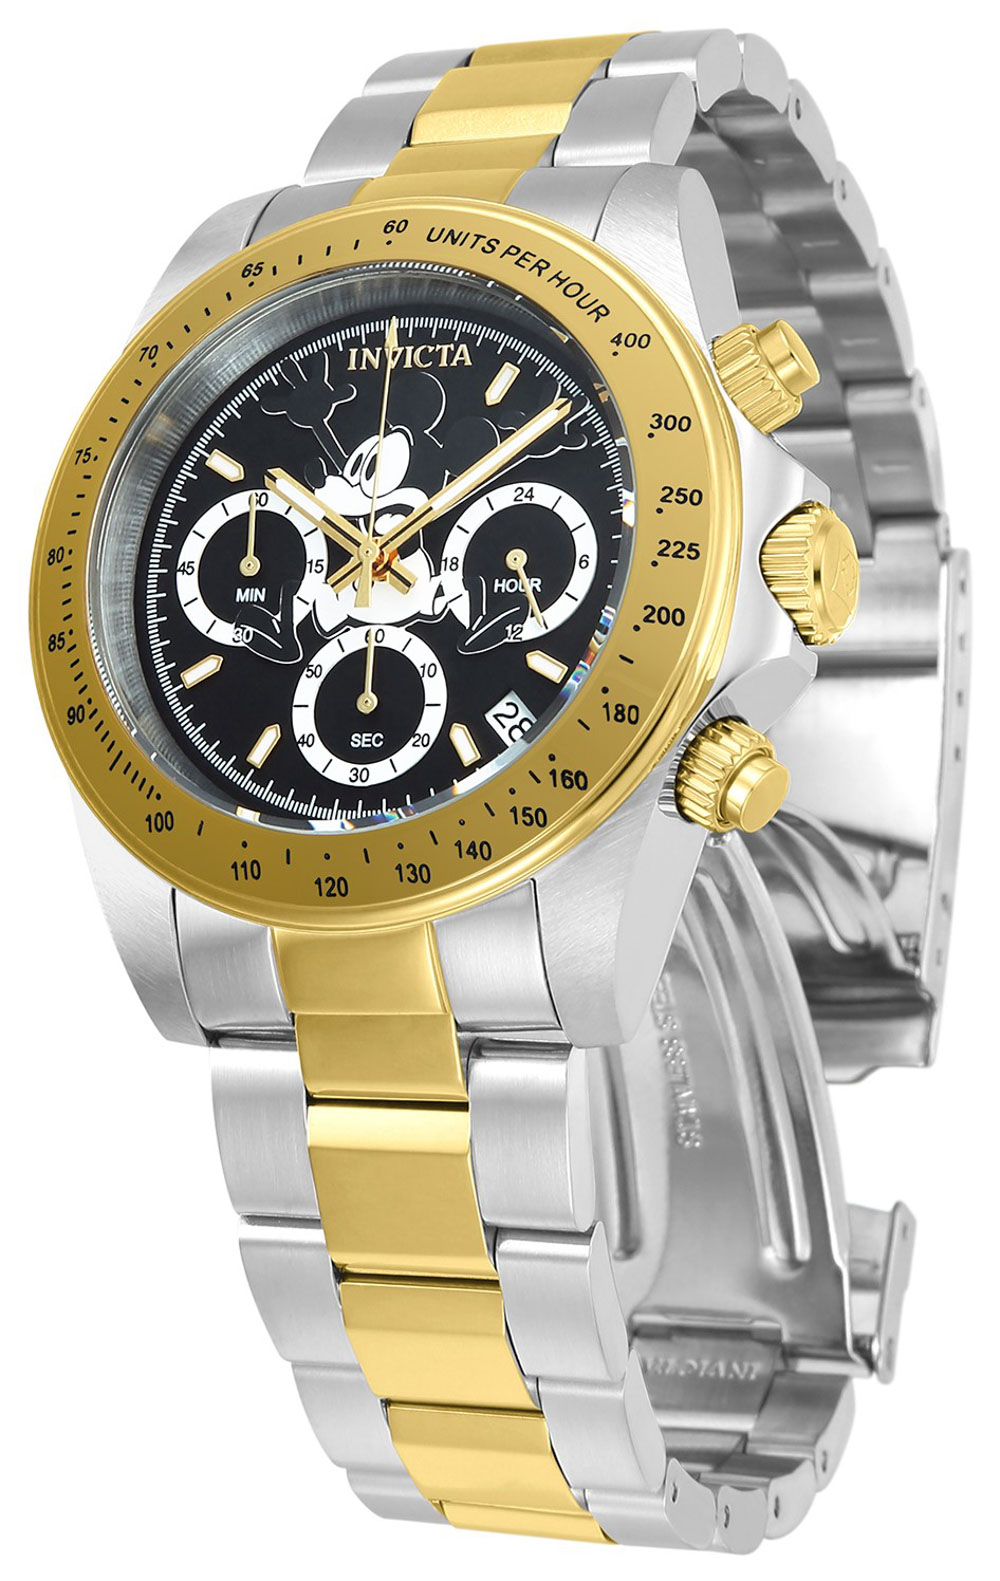 Invicta-Disney-limited-edition-watches-2